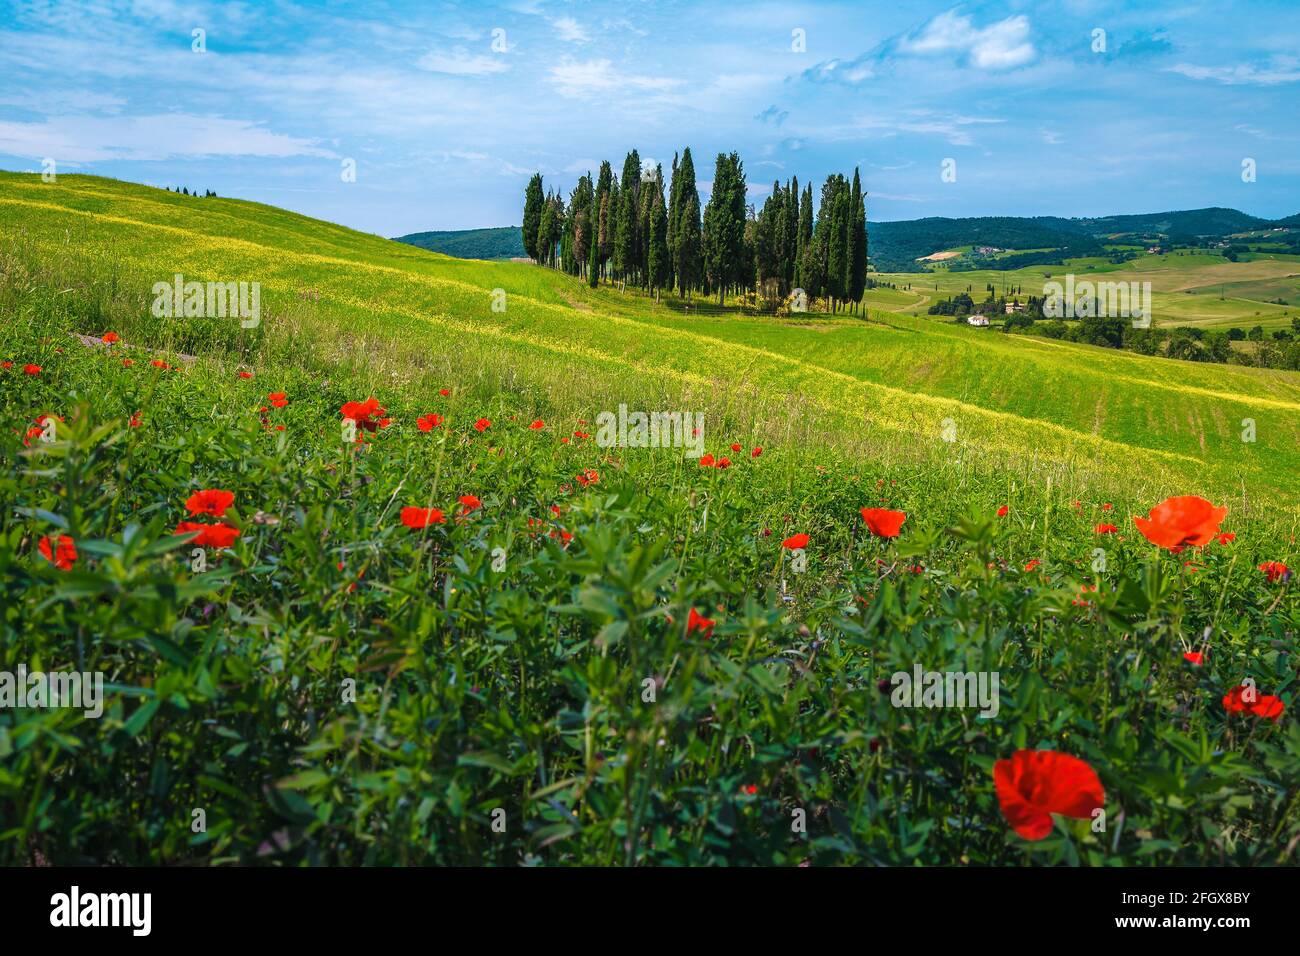 Stunning summer flowery fields with yellow canola flowers and red poppies. Cypress trees and agricultural fields in Tuscany, Italy, Europe Stock Photo